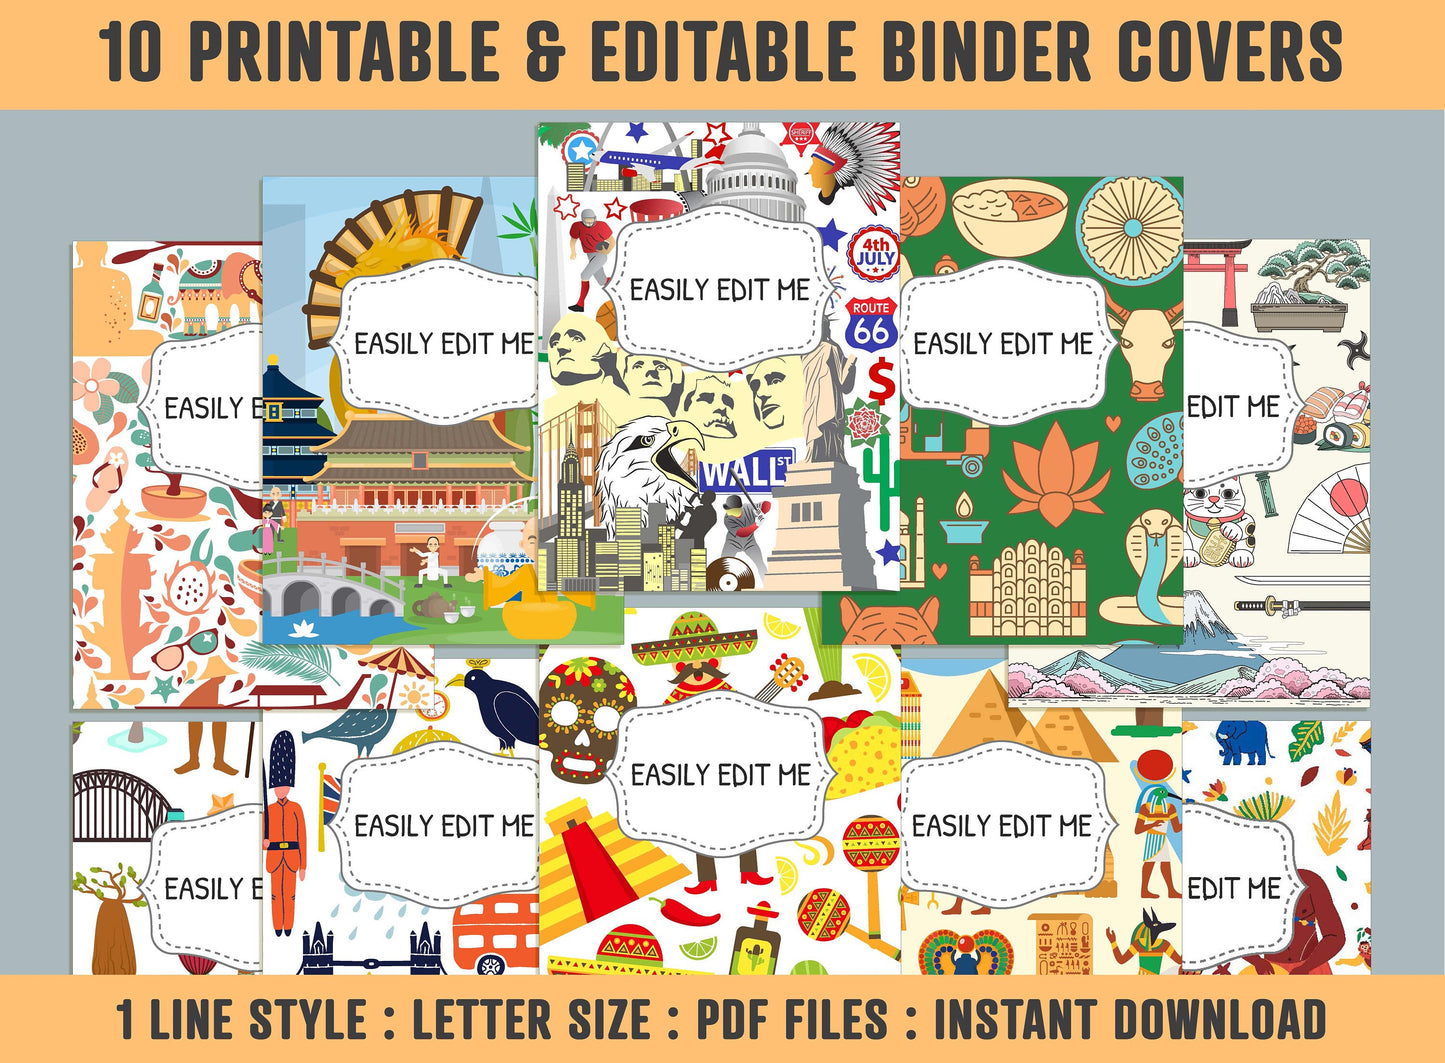 Cultural Travel Binder Cover, 10 Printable & Editable Binder Covers + Spines, Binder Inserts, Teacher/School Planner Cover Template